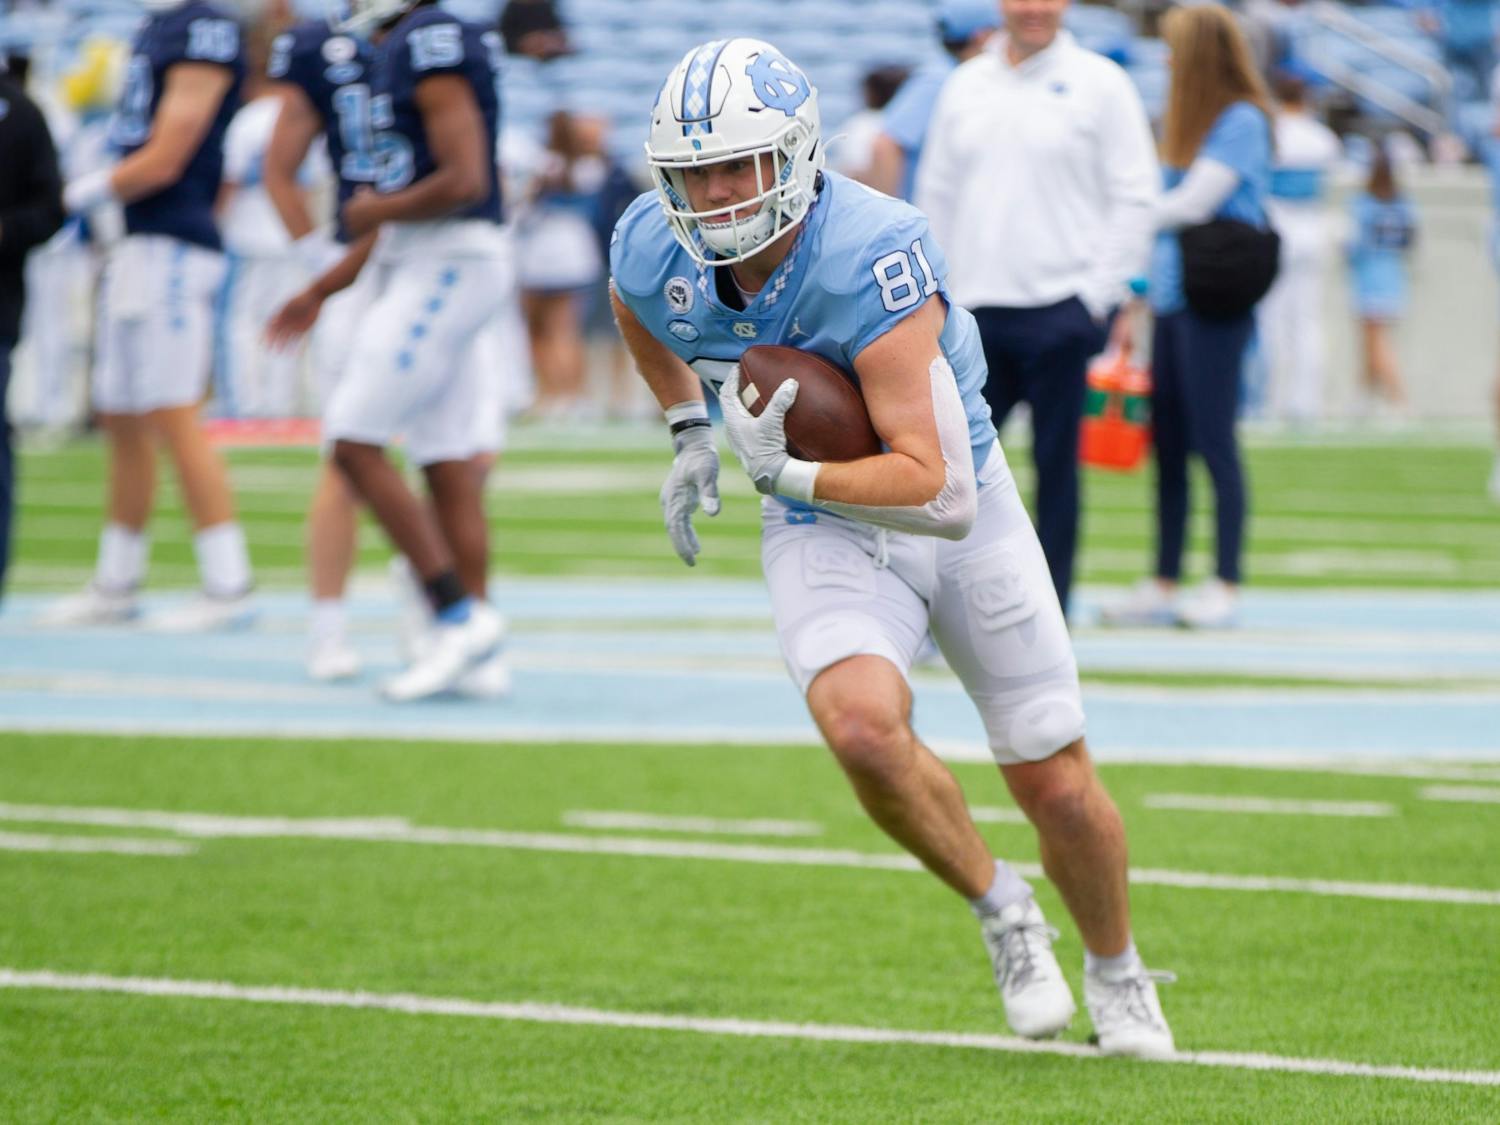 John Copenhaver (81), sophomore tight end, holds the ball during warmups for UNC football's spring scrimmage on April 9, 2022, in Chapel Hill, NC.